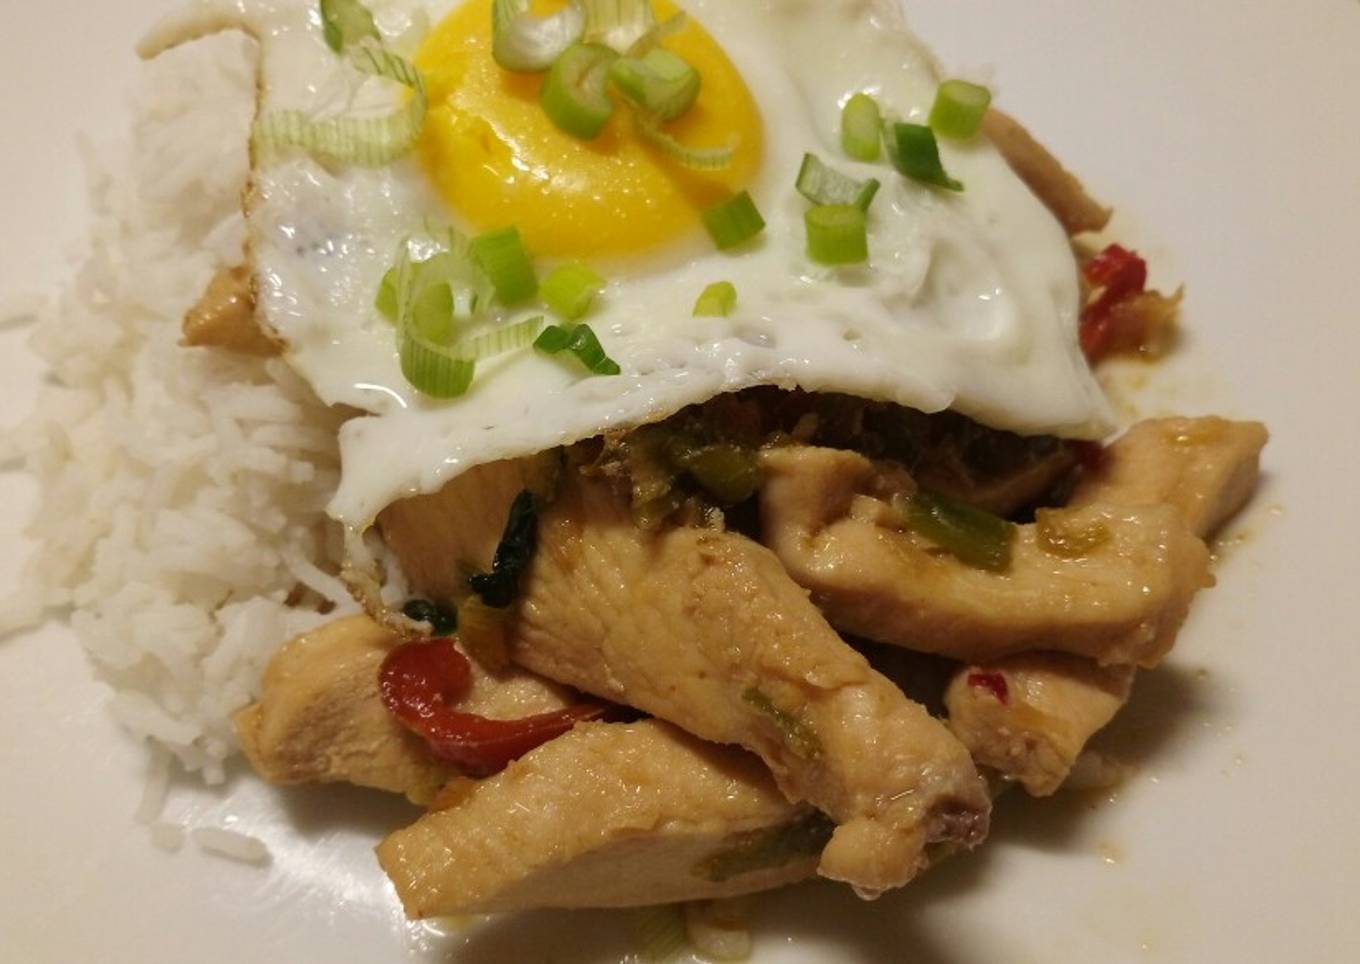 Yui inspired chicken and peppers